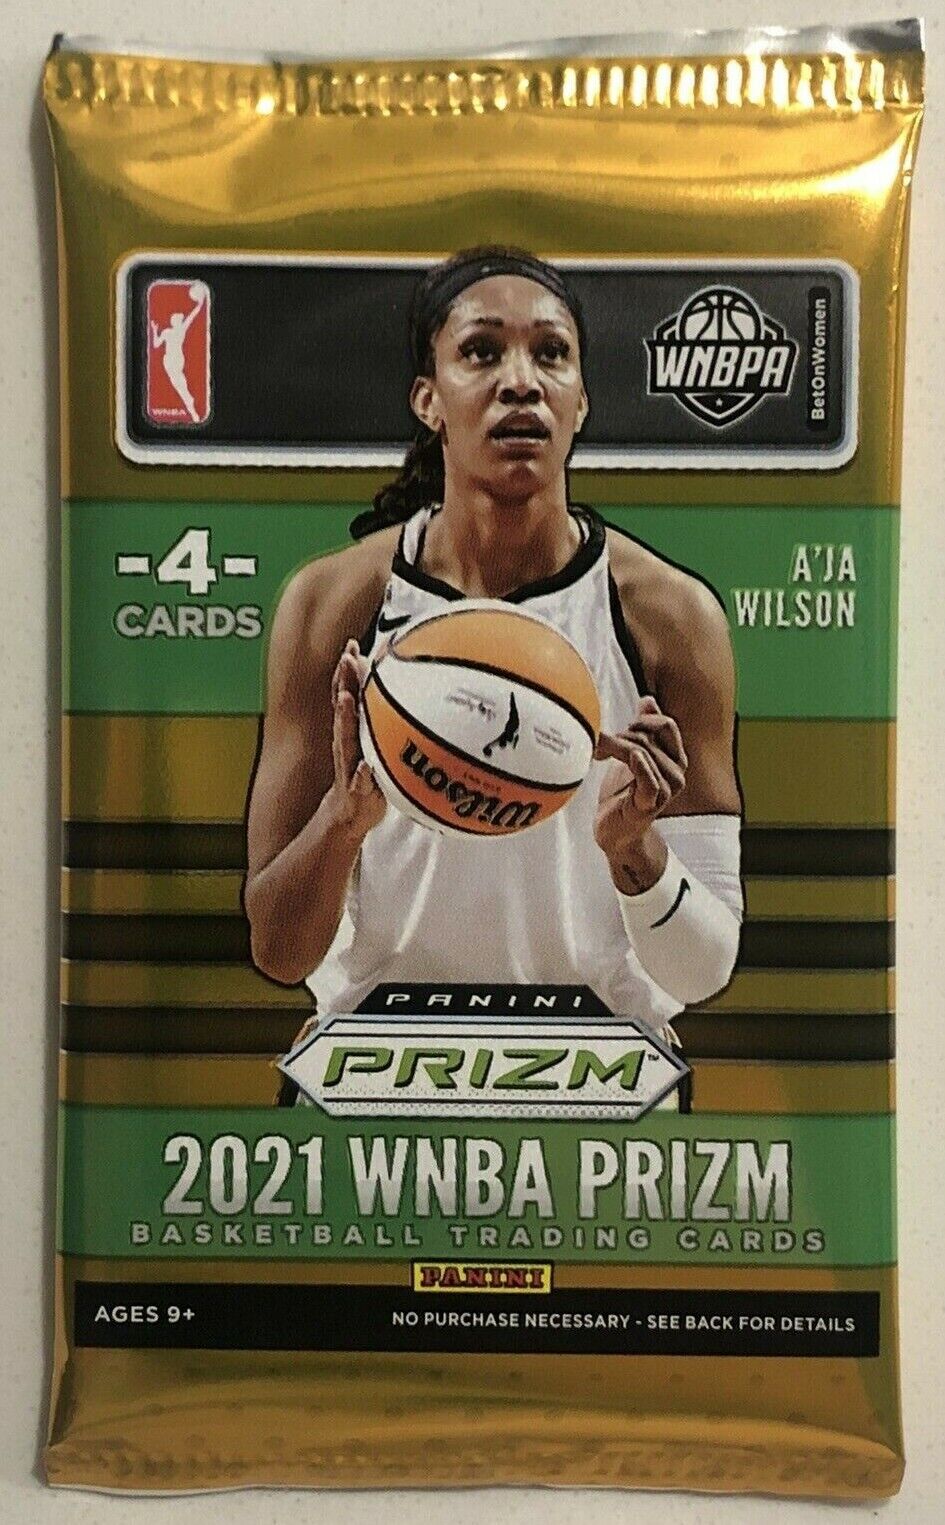 2021 PANINI PRIZM WNBA BASKETBALL TRADING Daily bargain sale CARDS SEAL - BRAND NEW Lowest price challenge